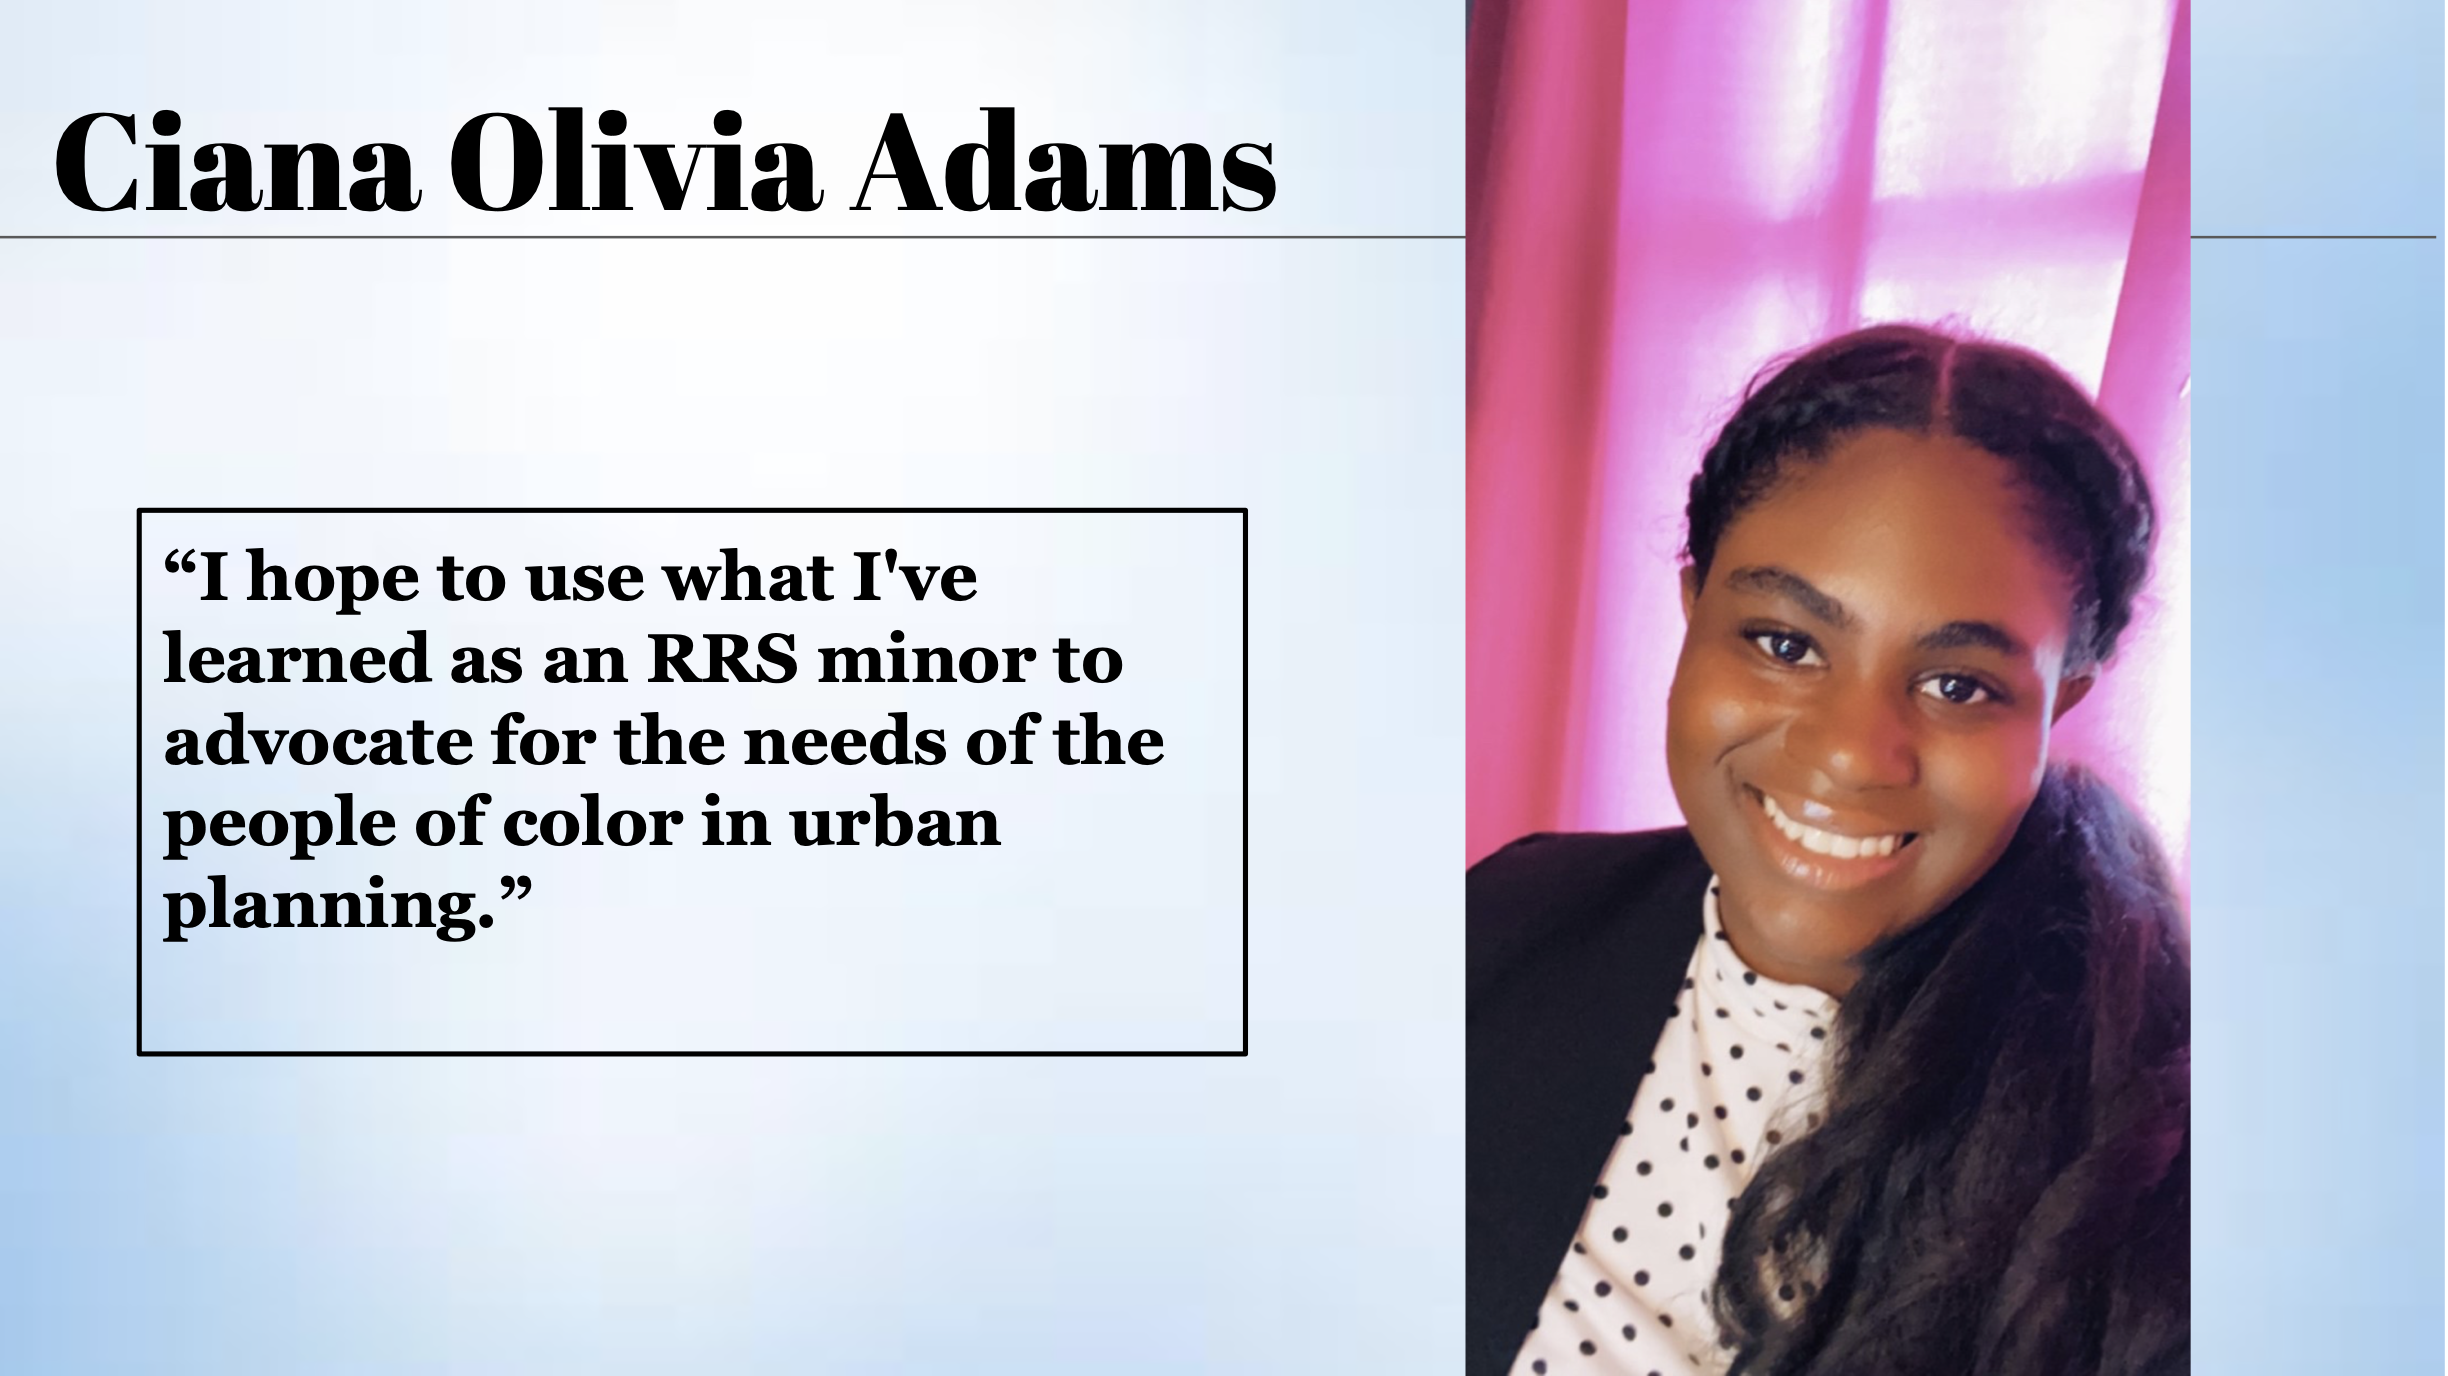 Ciana Olivia Adams said, "I hope to use what I've learned as an RRS minor to advocate for the needs of the people of color in urban planning."